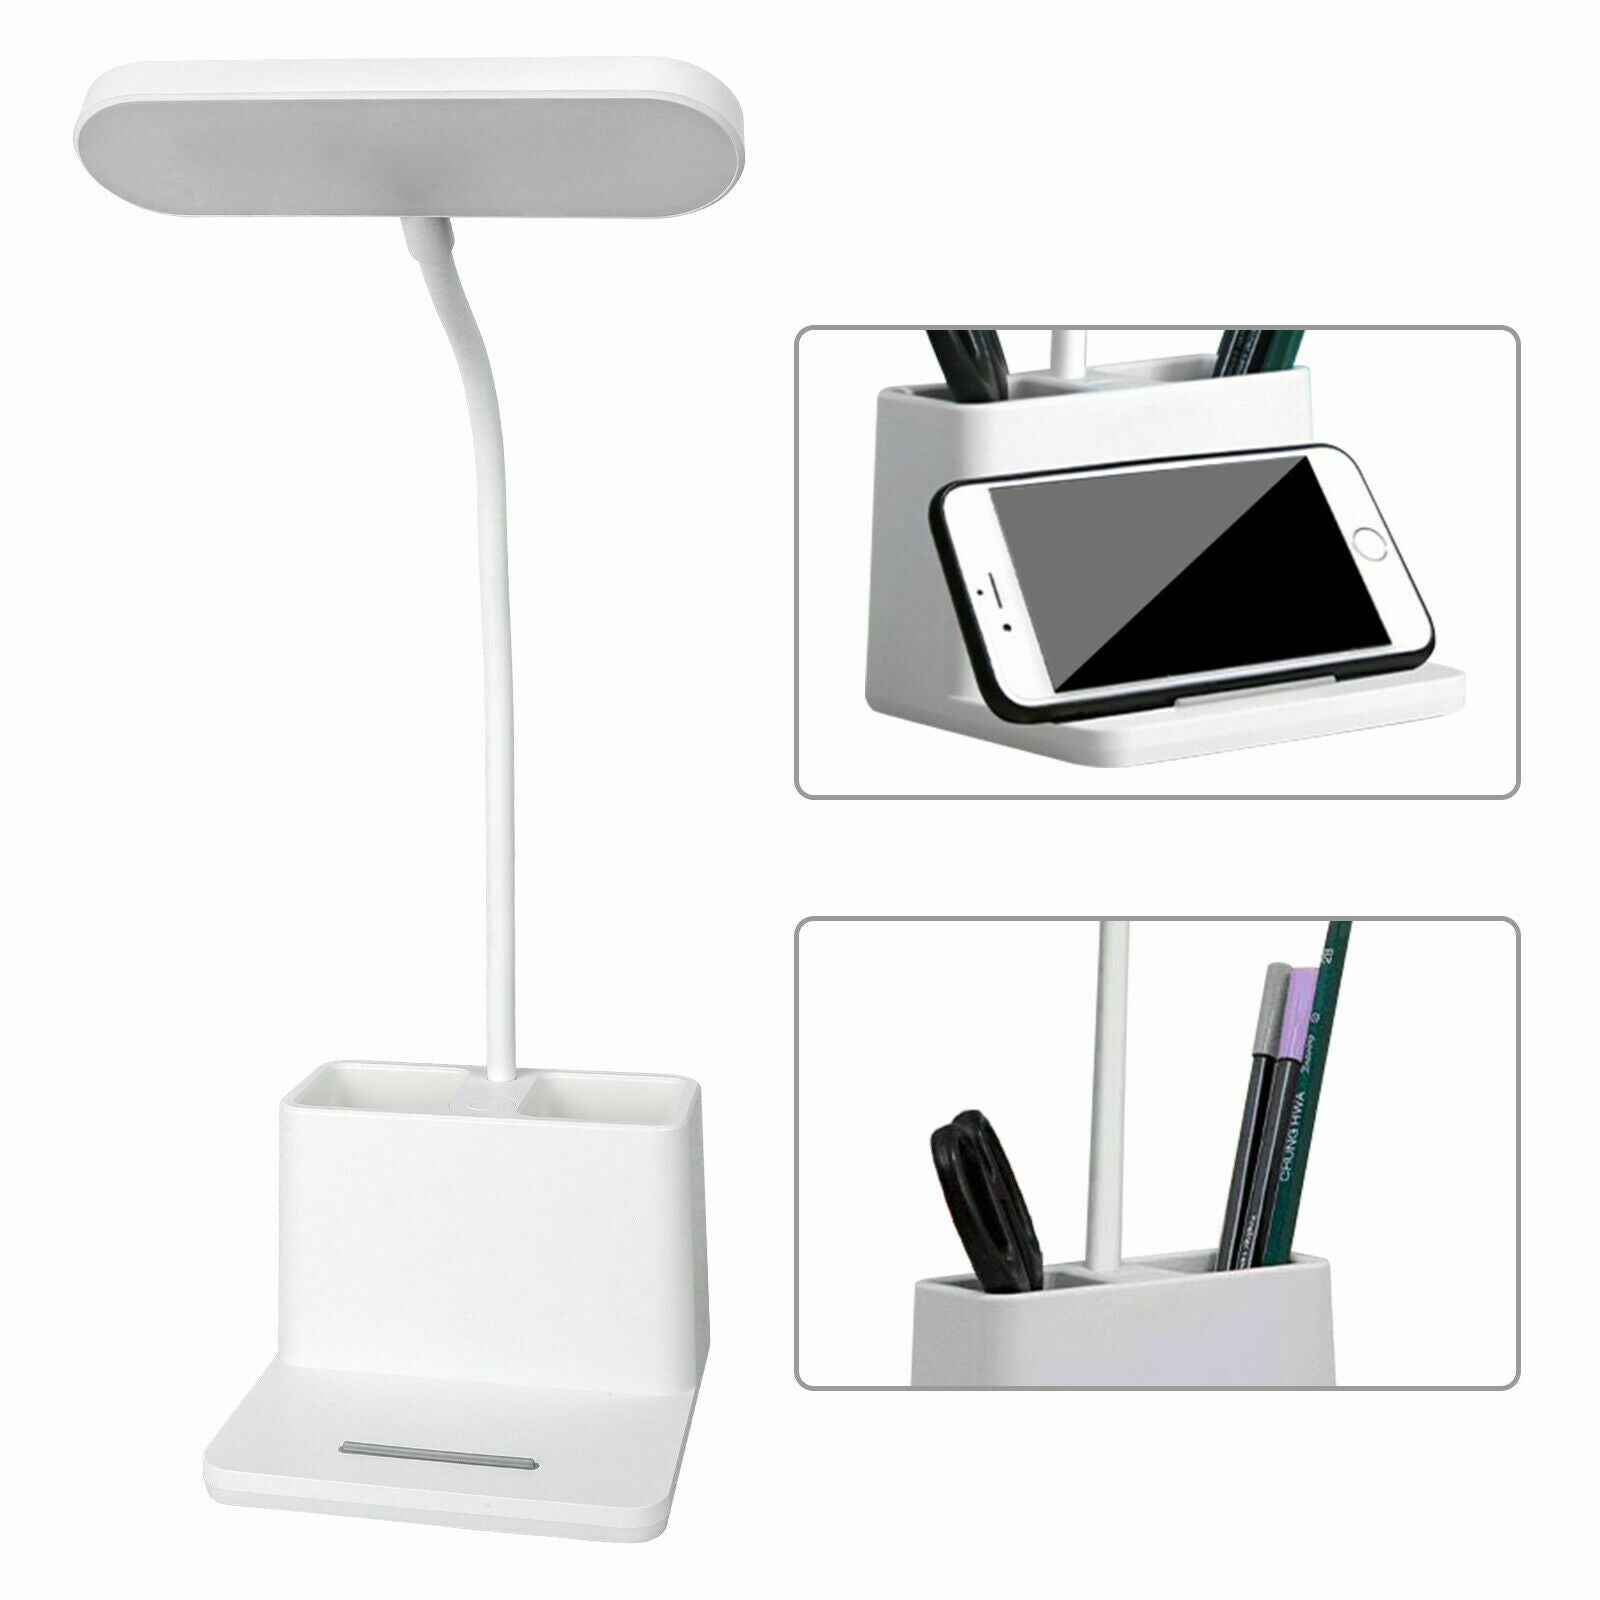 Dimmable LED Desk Light Table Beside Reading Lamp Touch Control USB Rechargeable